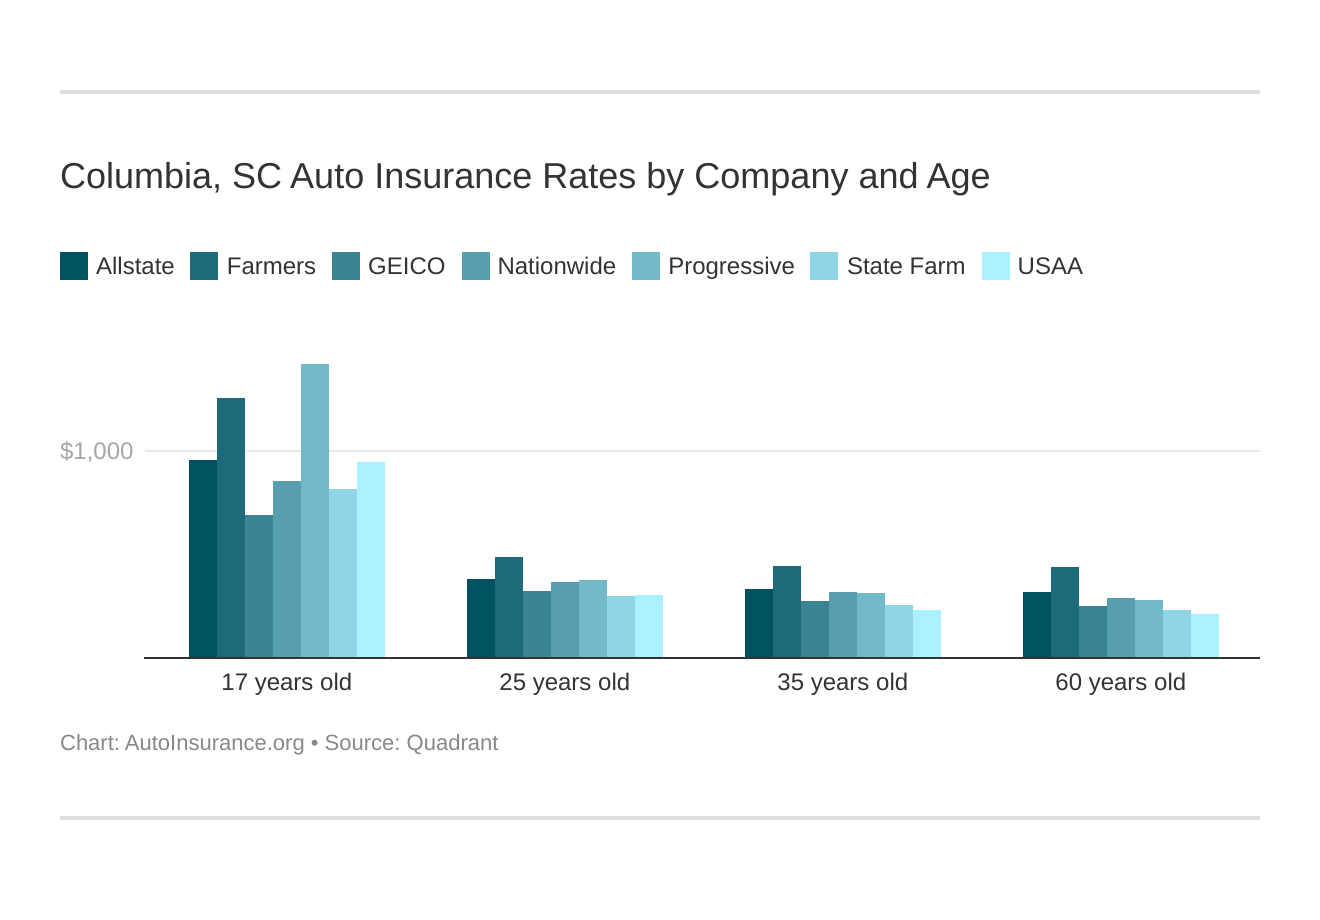 Columbia, SC Auto Insurance Rates by Company and Age